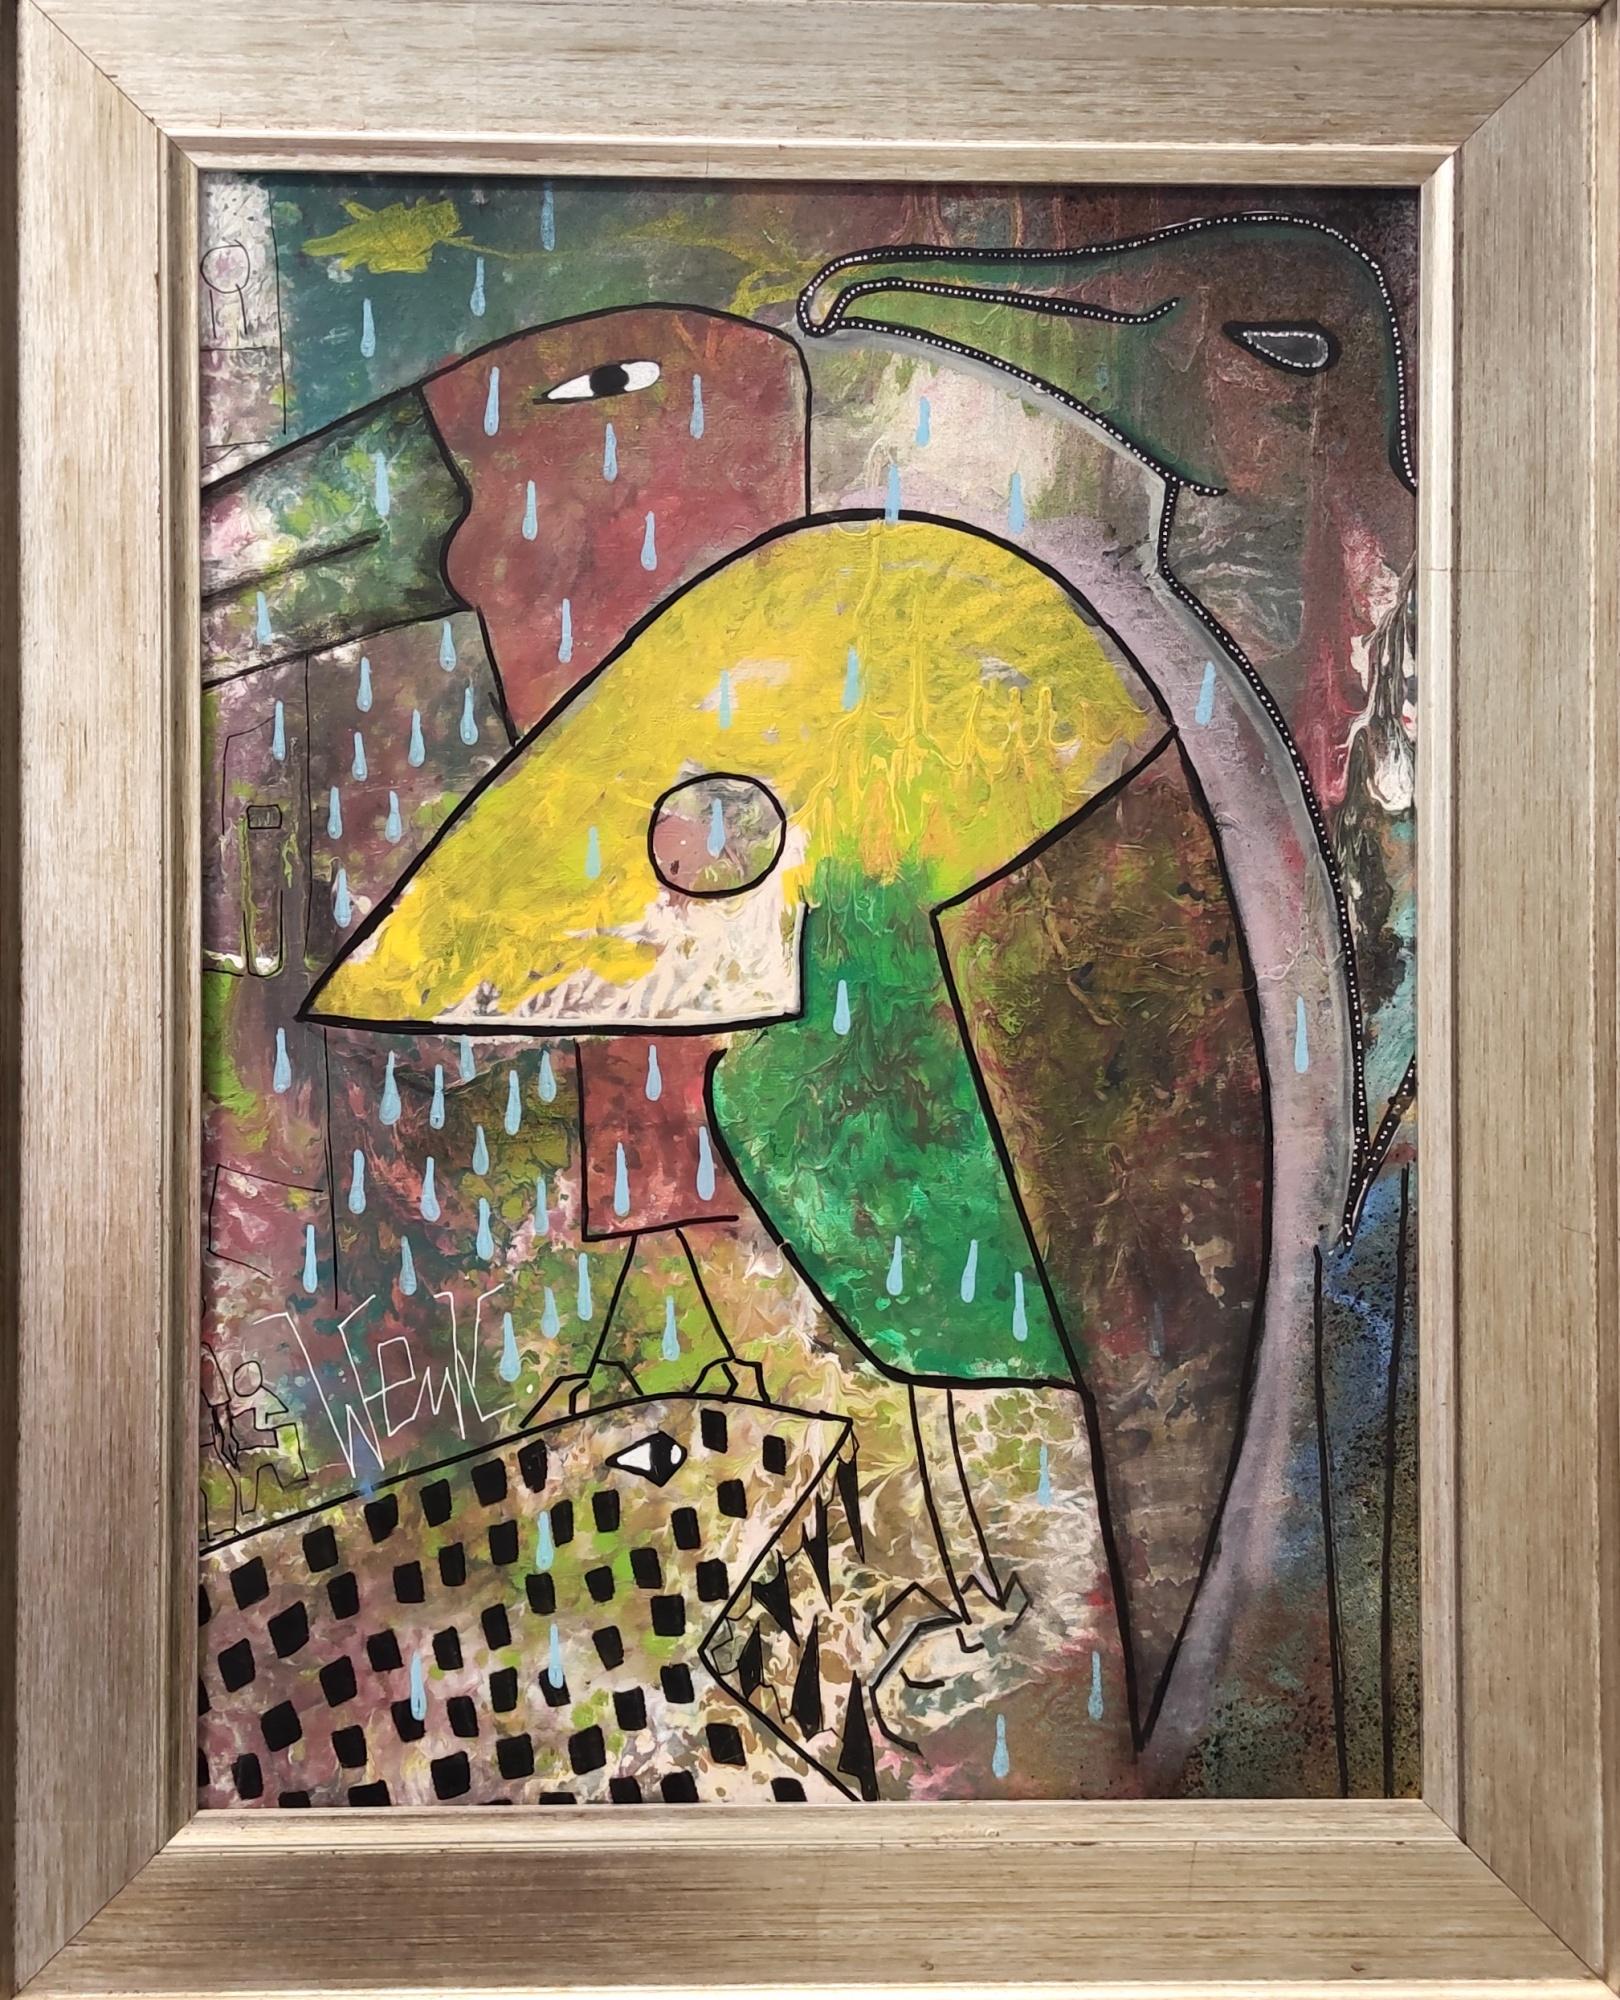 Translated title: "Tropical bird under the rain". 

Acrylic on a wooden panel. 
The frame is included.

Painting: 
44 x 58 cm 

With frame: 
57x71 cm